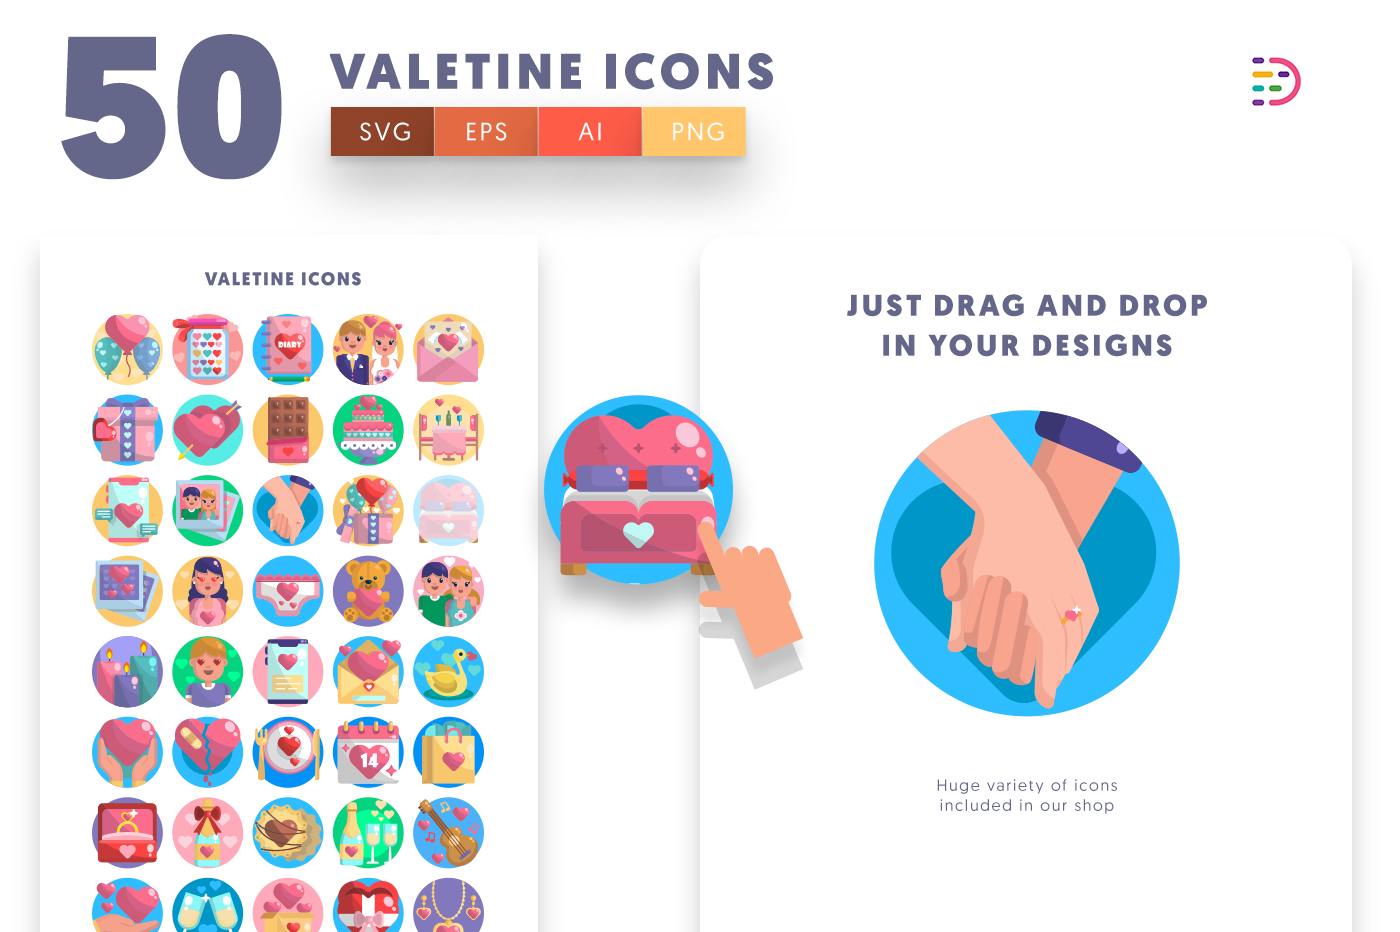 Drag and drop vector Valentines Icons